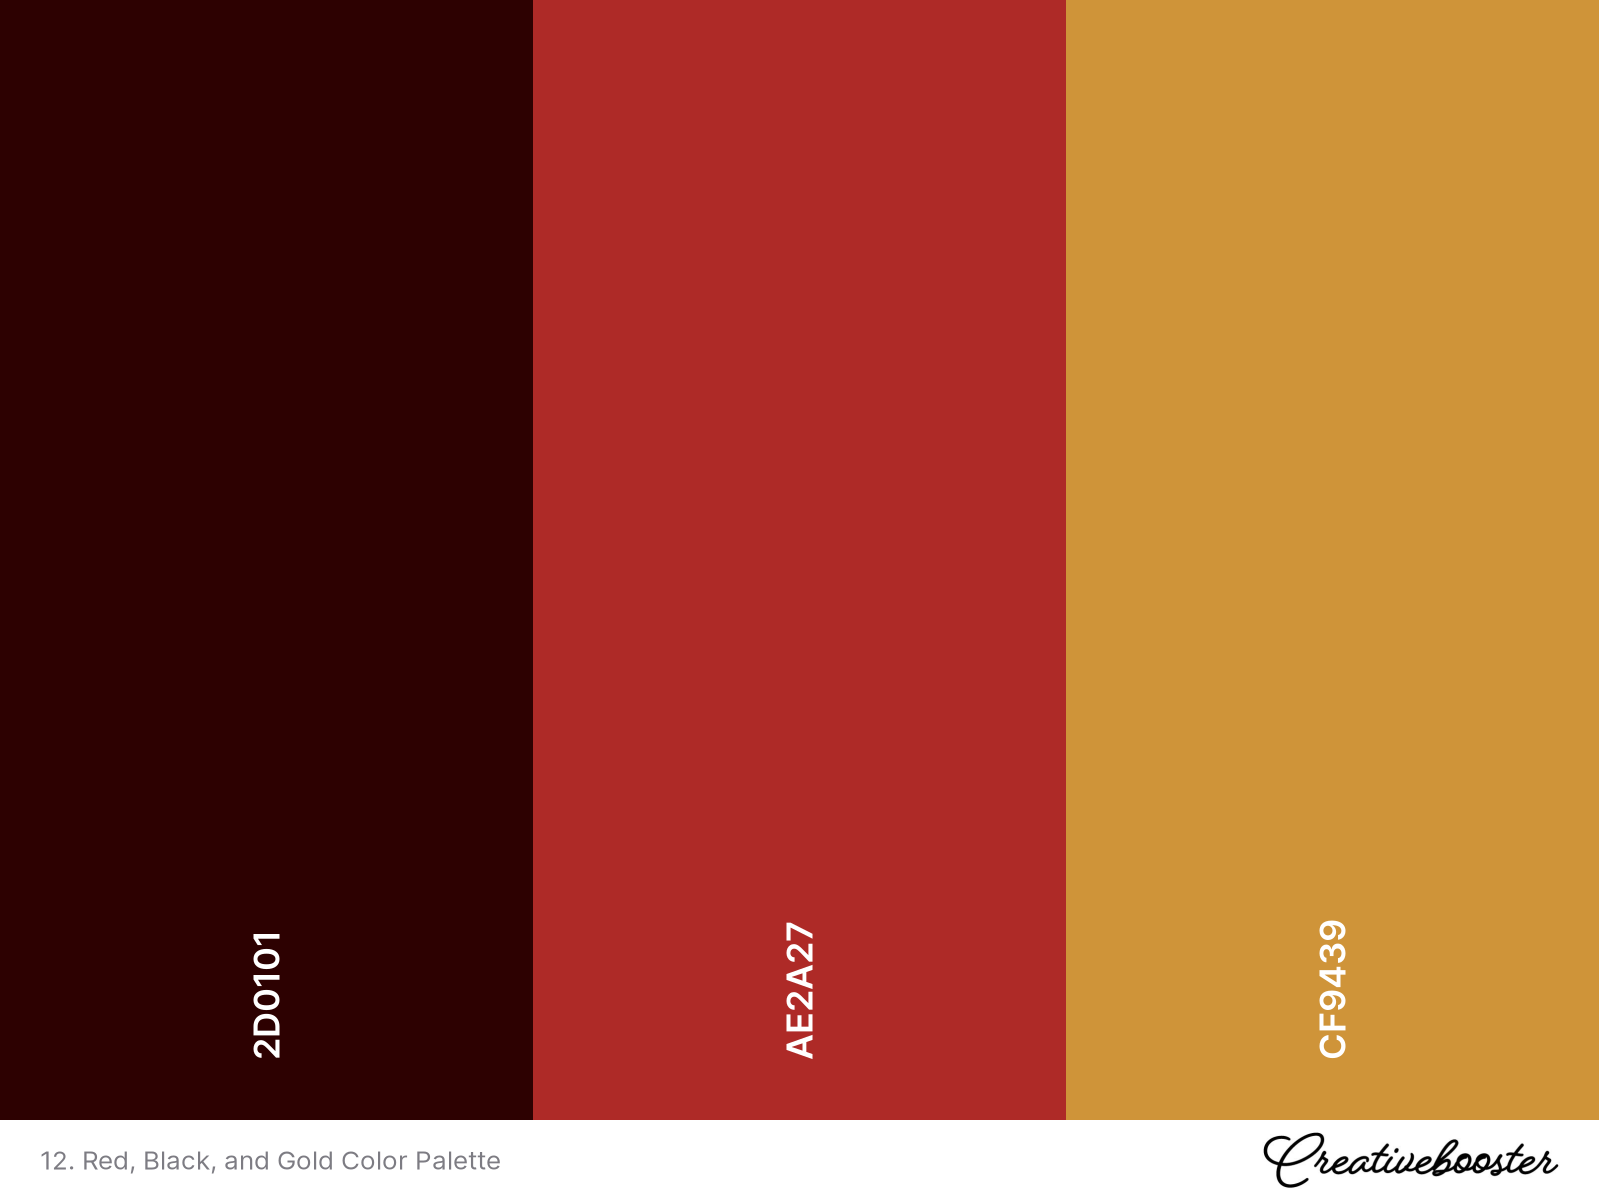 12. Red, Black, and Gold Color Palette